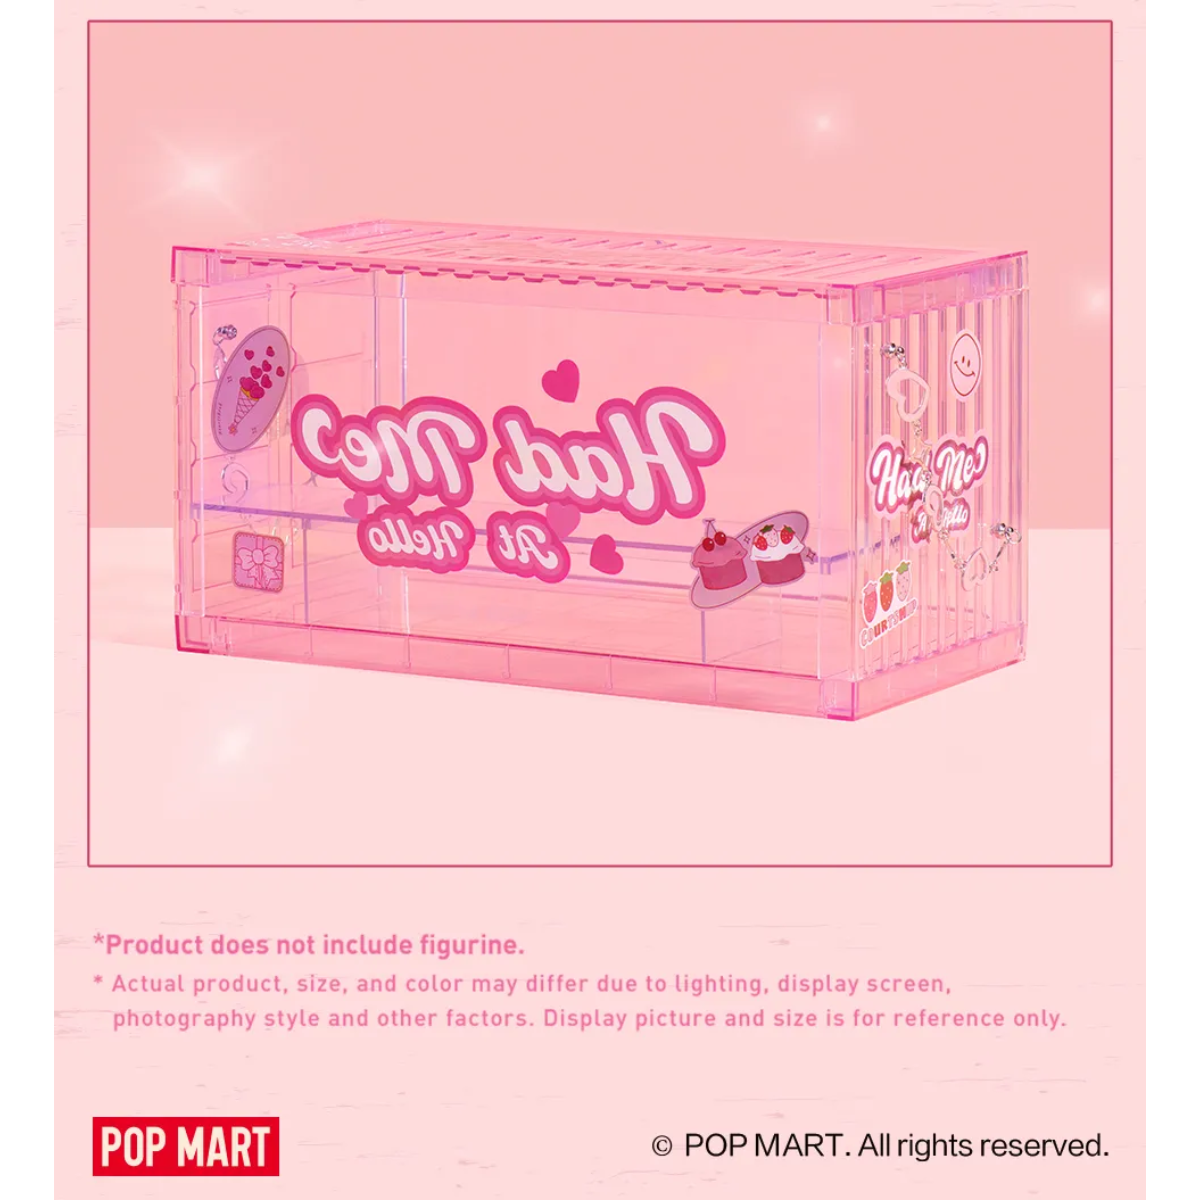 POP MART Assembled Display Container (Crush On You)-Pop Mart-Ace Cards &amp; Collectibles